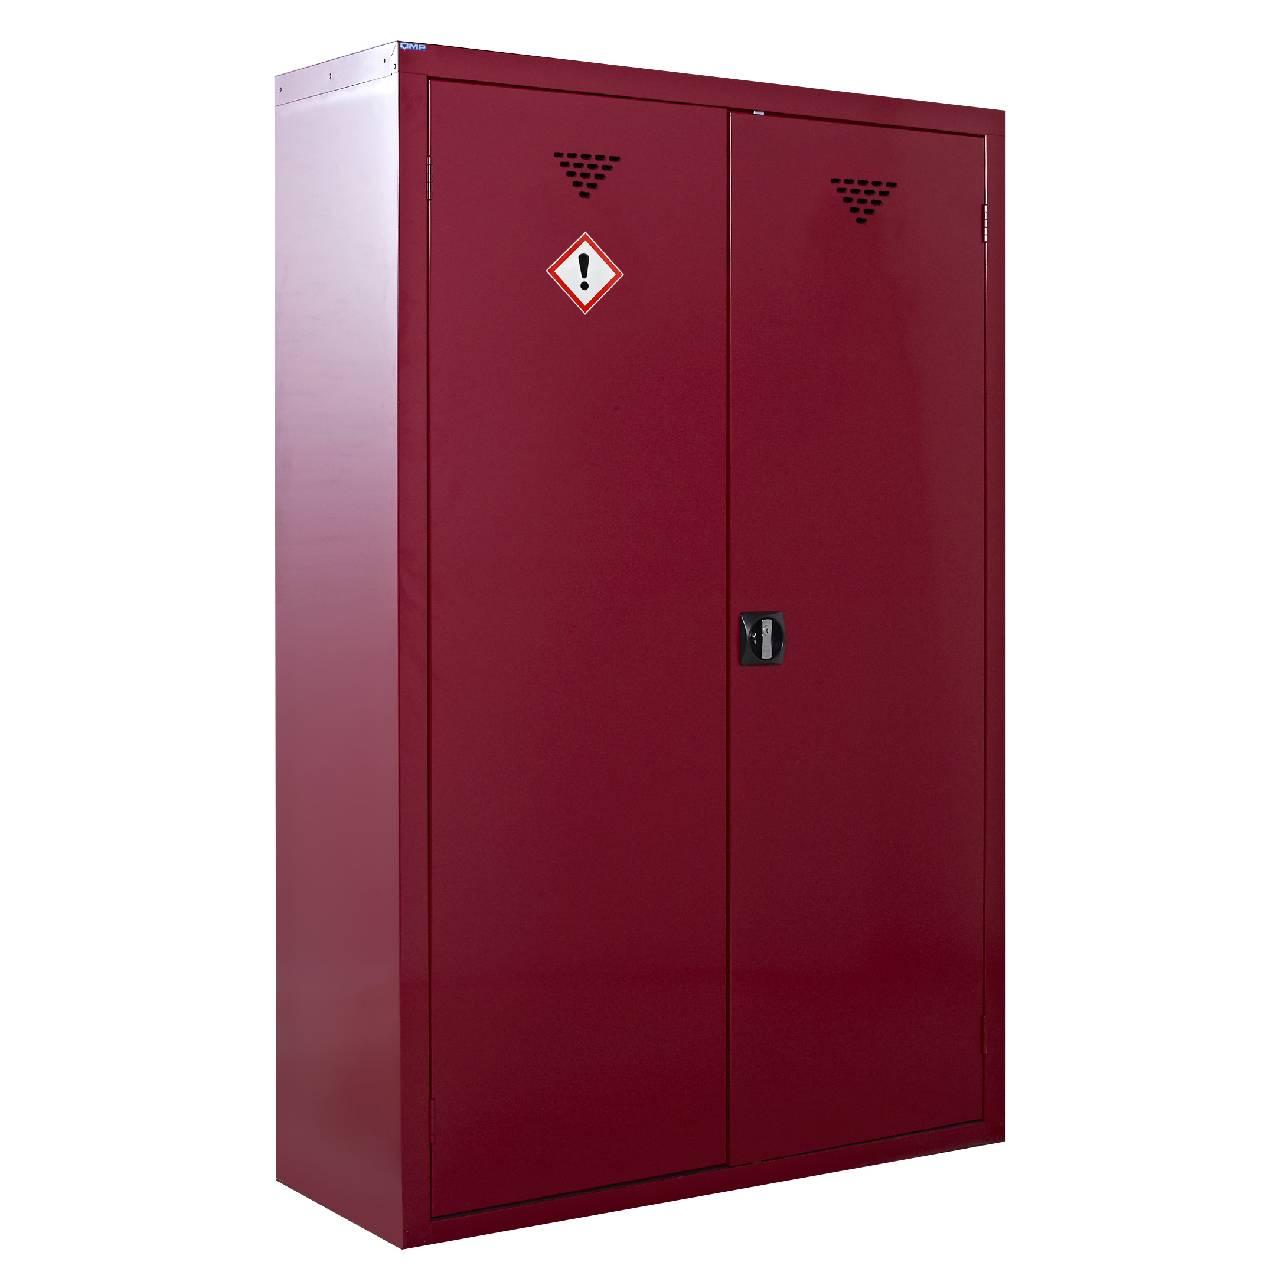 QMP Pesticide & Agrochemical Floor Standing Cabinets - 1800H x 1200W x 460D mm